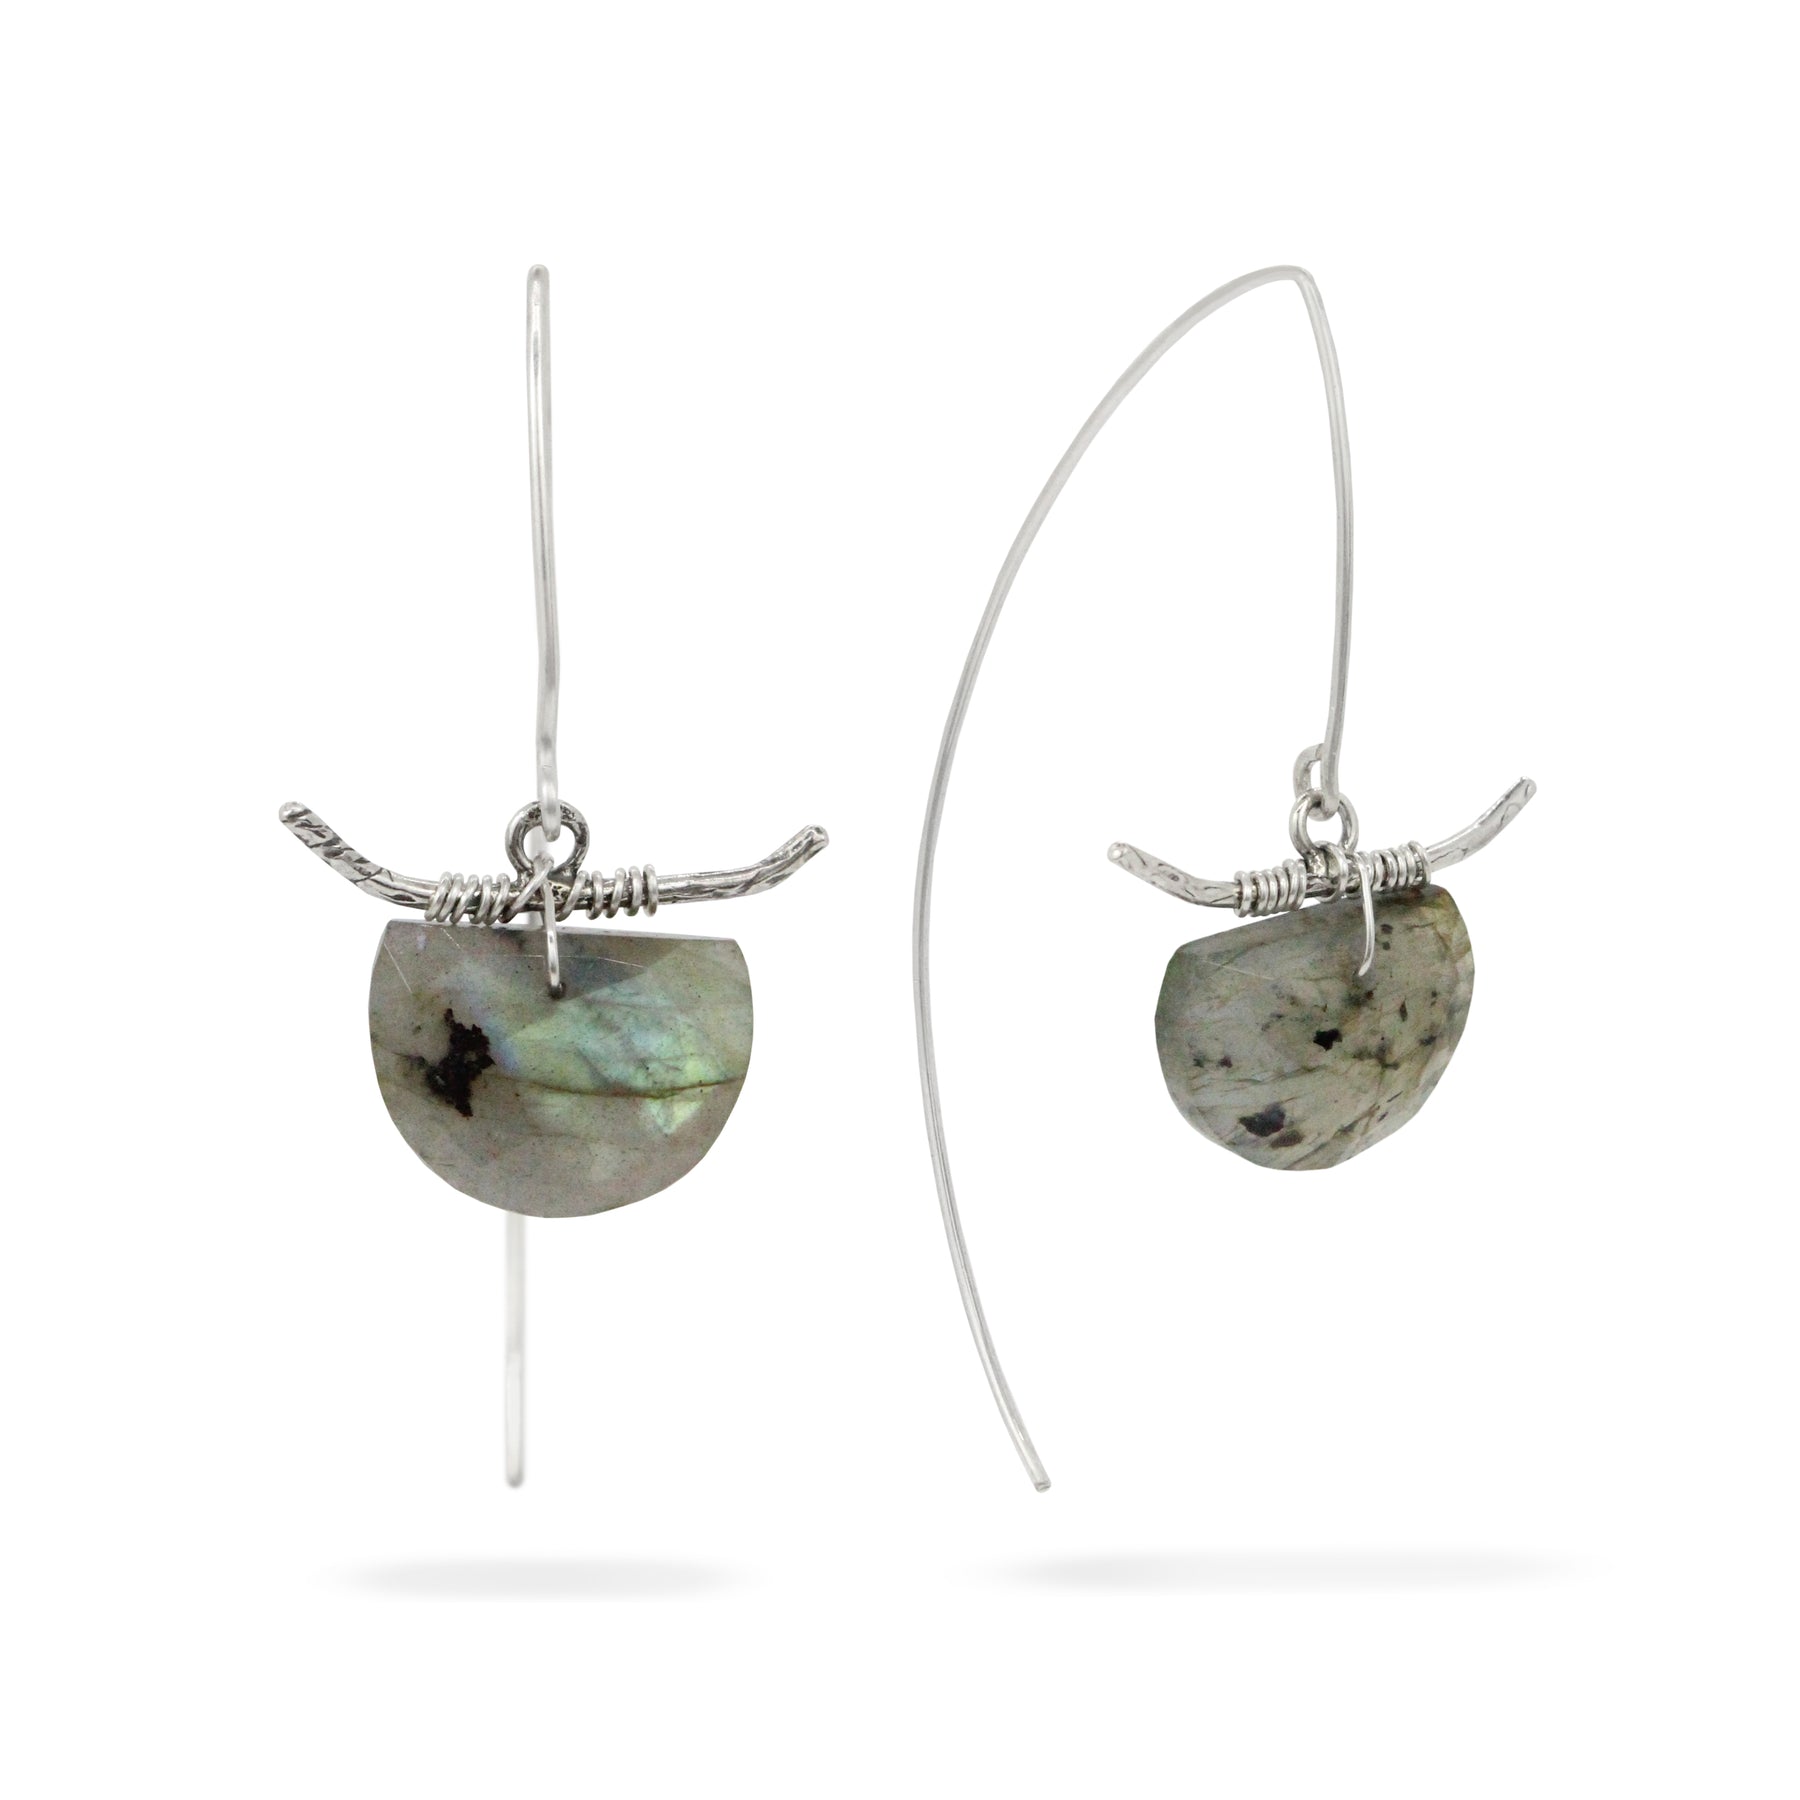 Tranquility Earrings - Susan Rodgers Designs